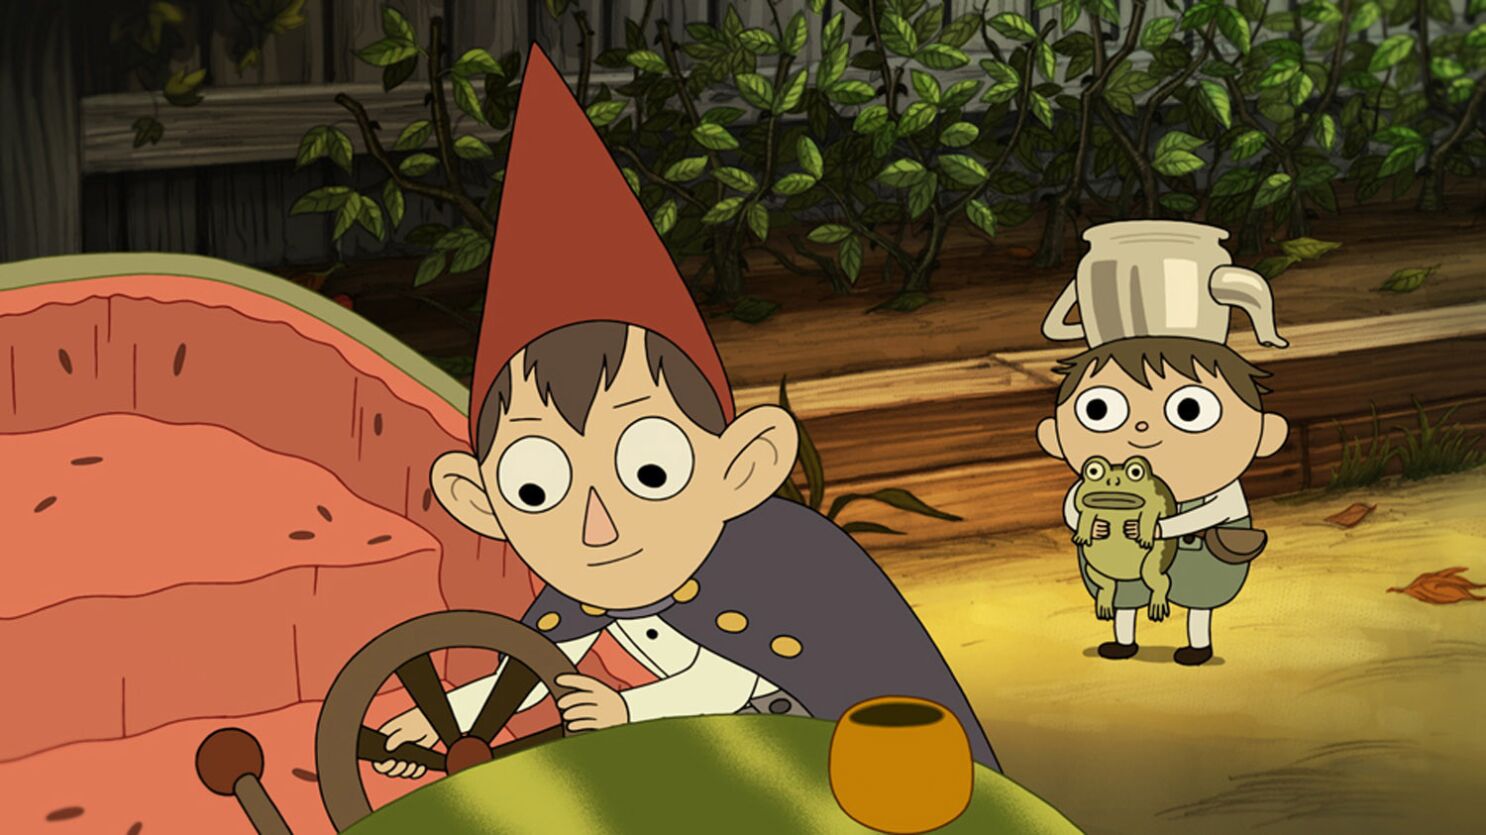 Over the Garden Wall' gets lost in creator's imagination - Los Angeles Times